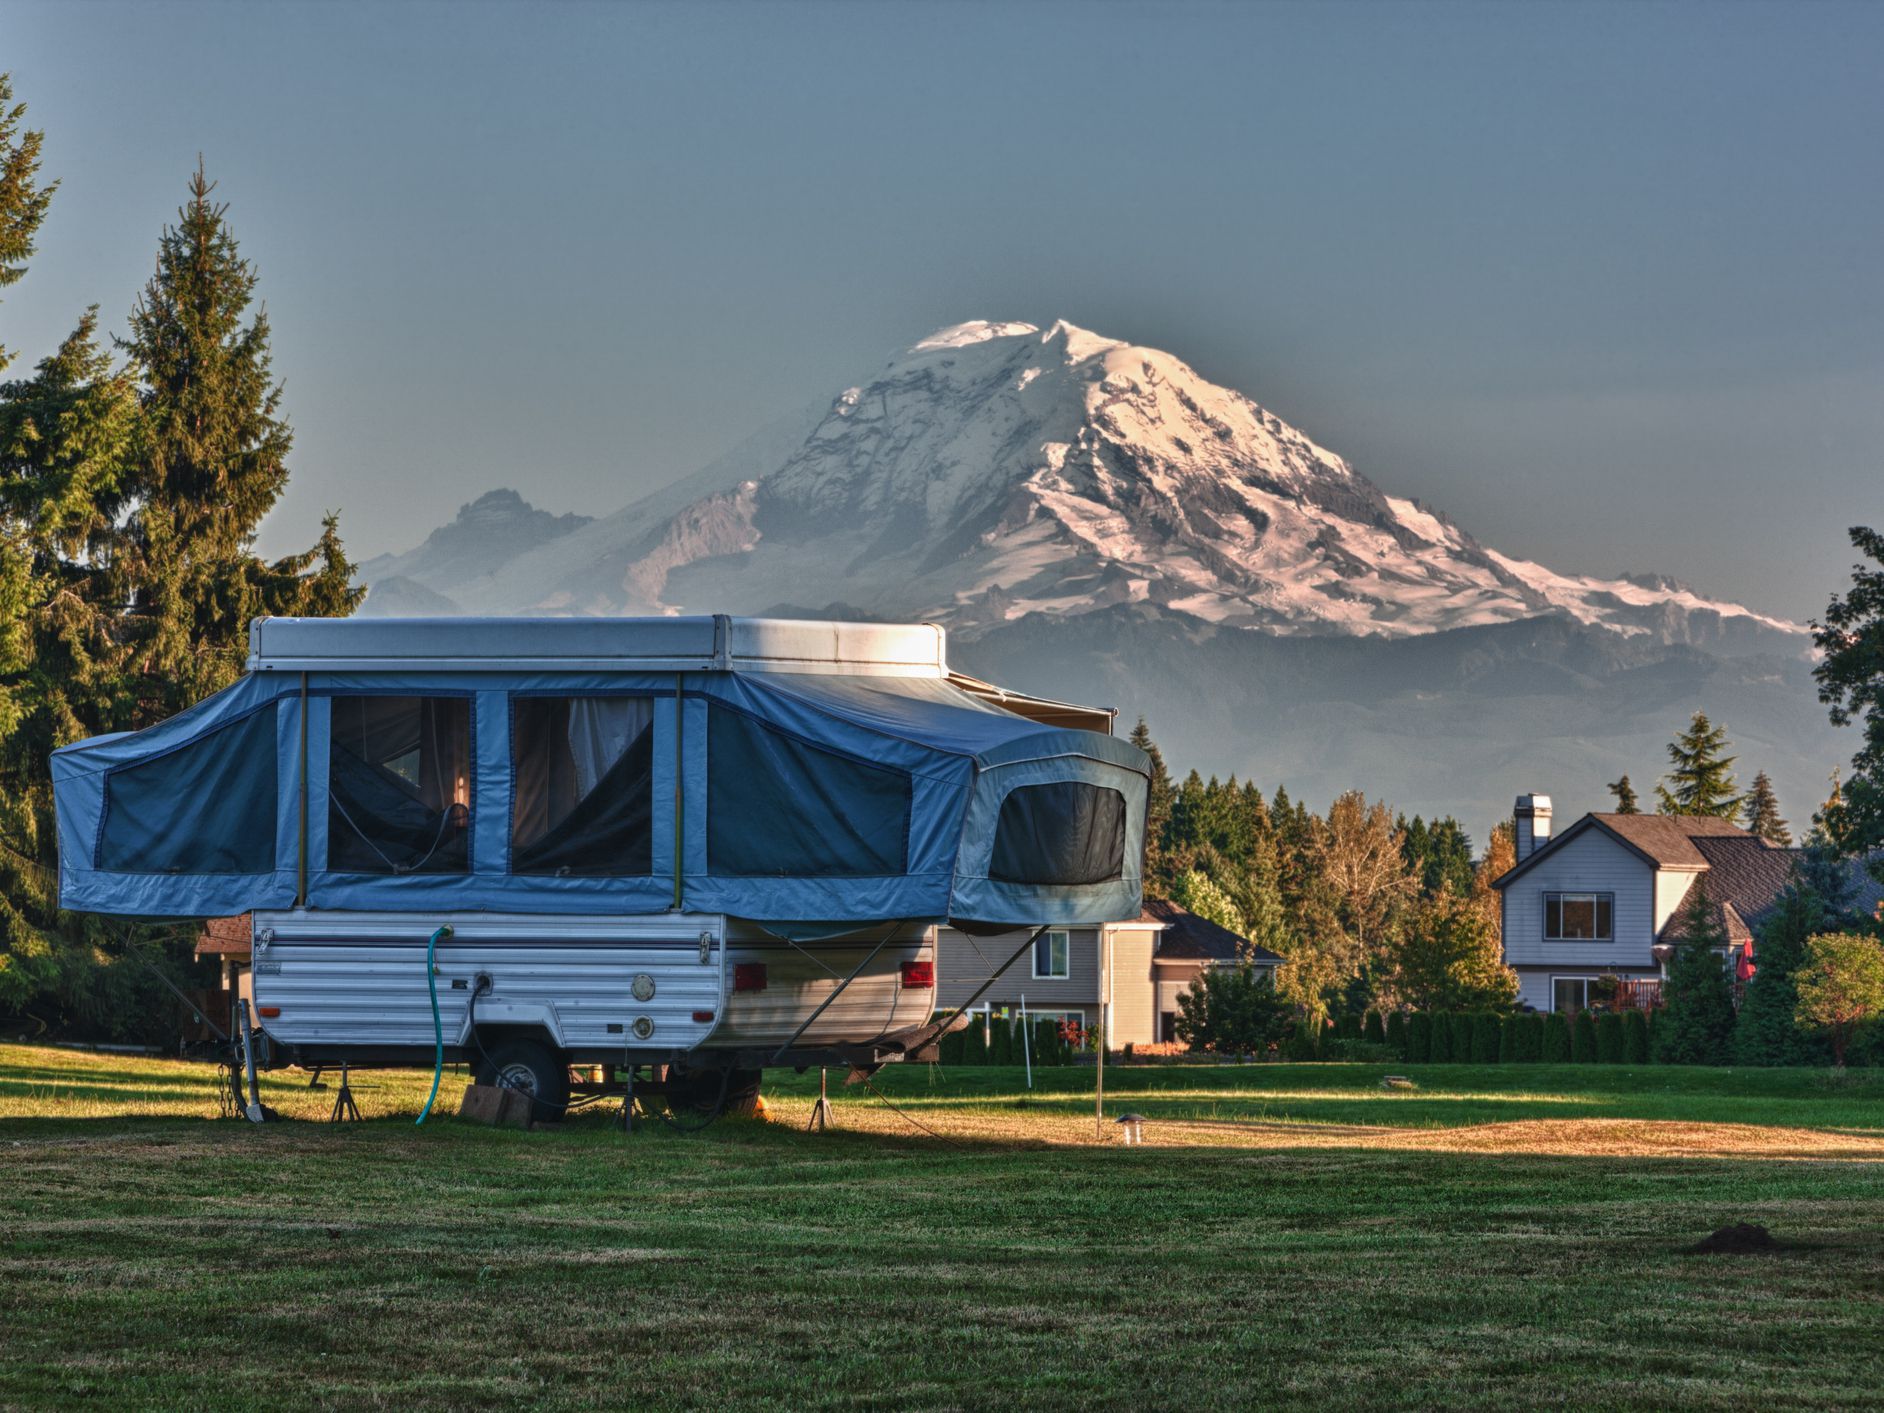 Light enough to tow with family vehicles, pop-up campers extend up and out to transform into big tents that don’t have to touch the ground. They have a hard base and canvas body and have been the staples of budget-minded camping families for generations.